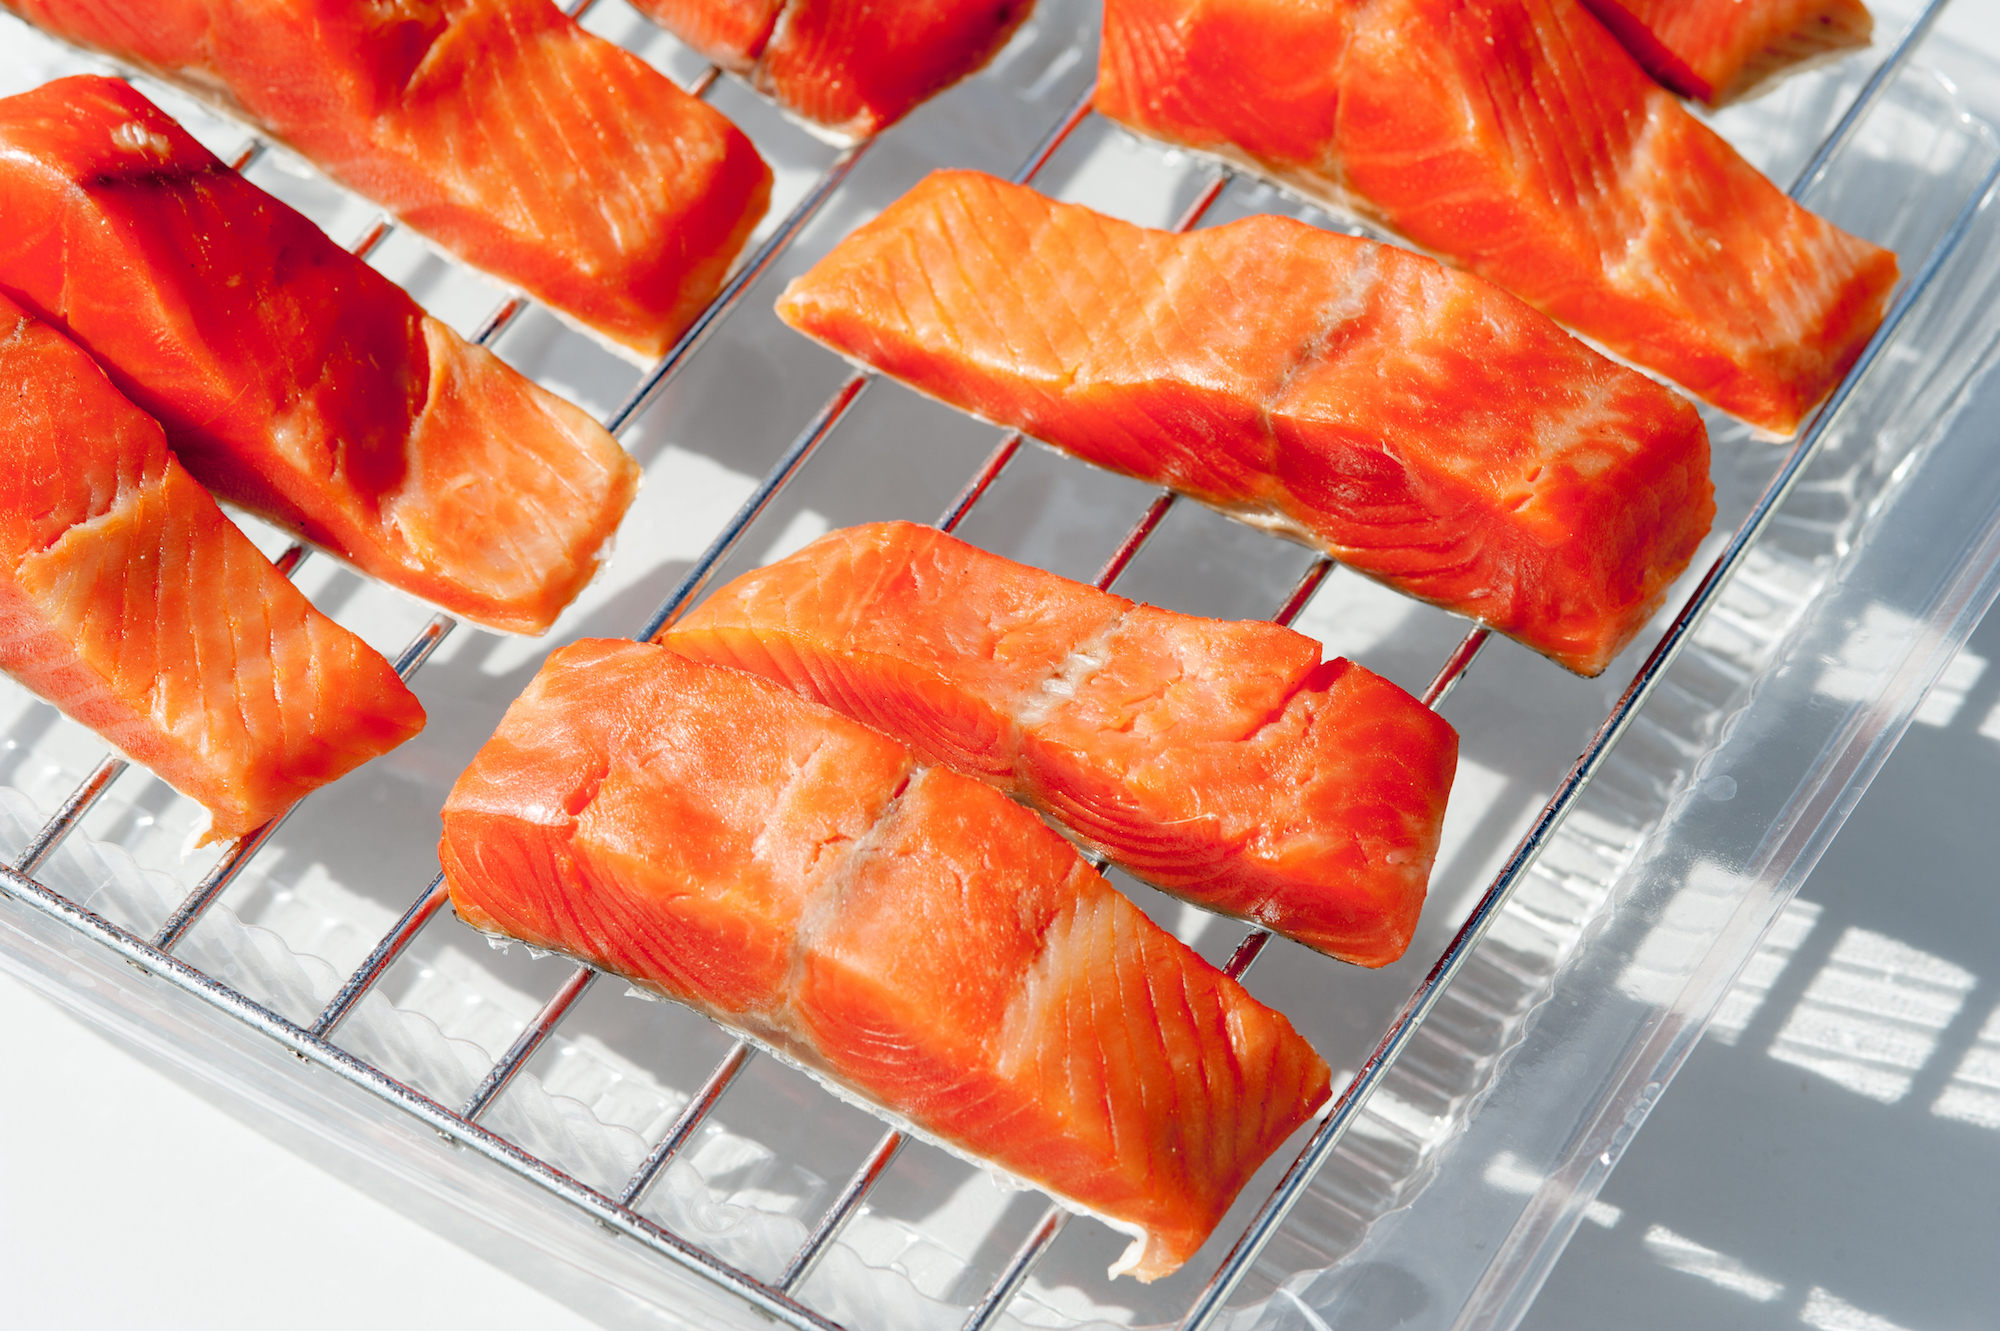 Strips of salmon are laid out on a wire rack prior to being smoked.